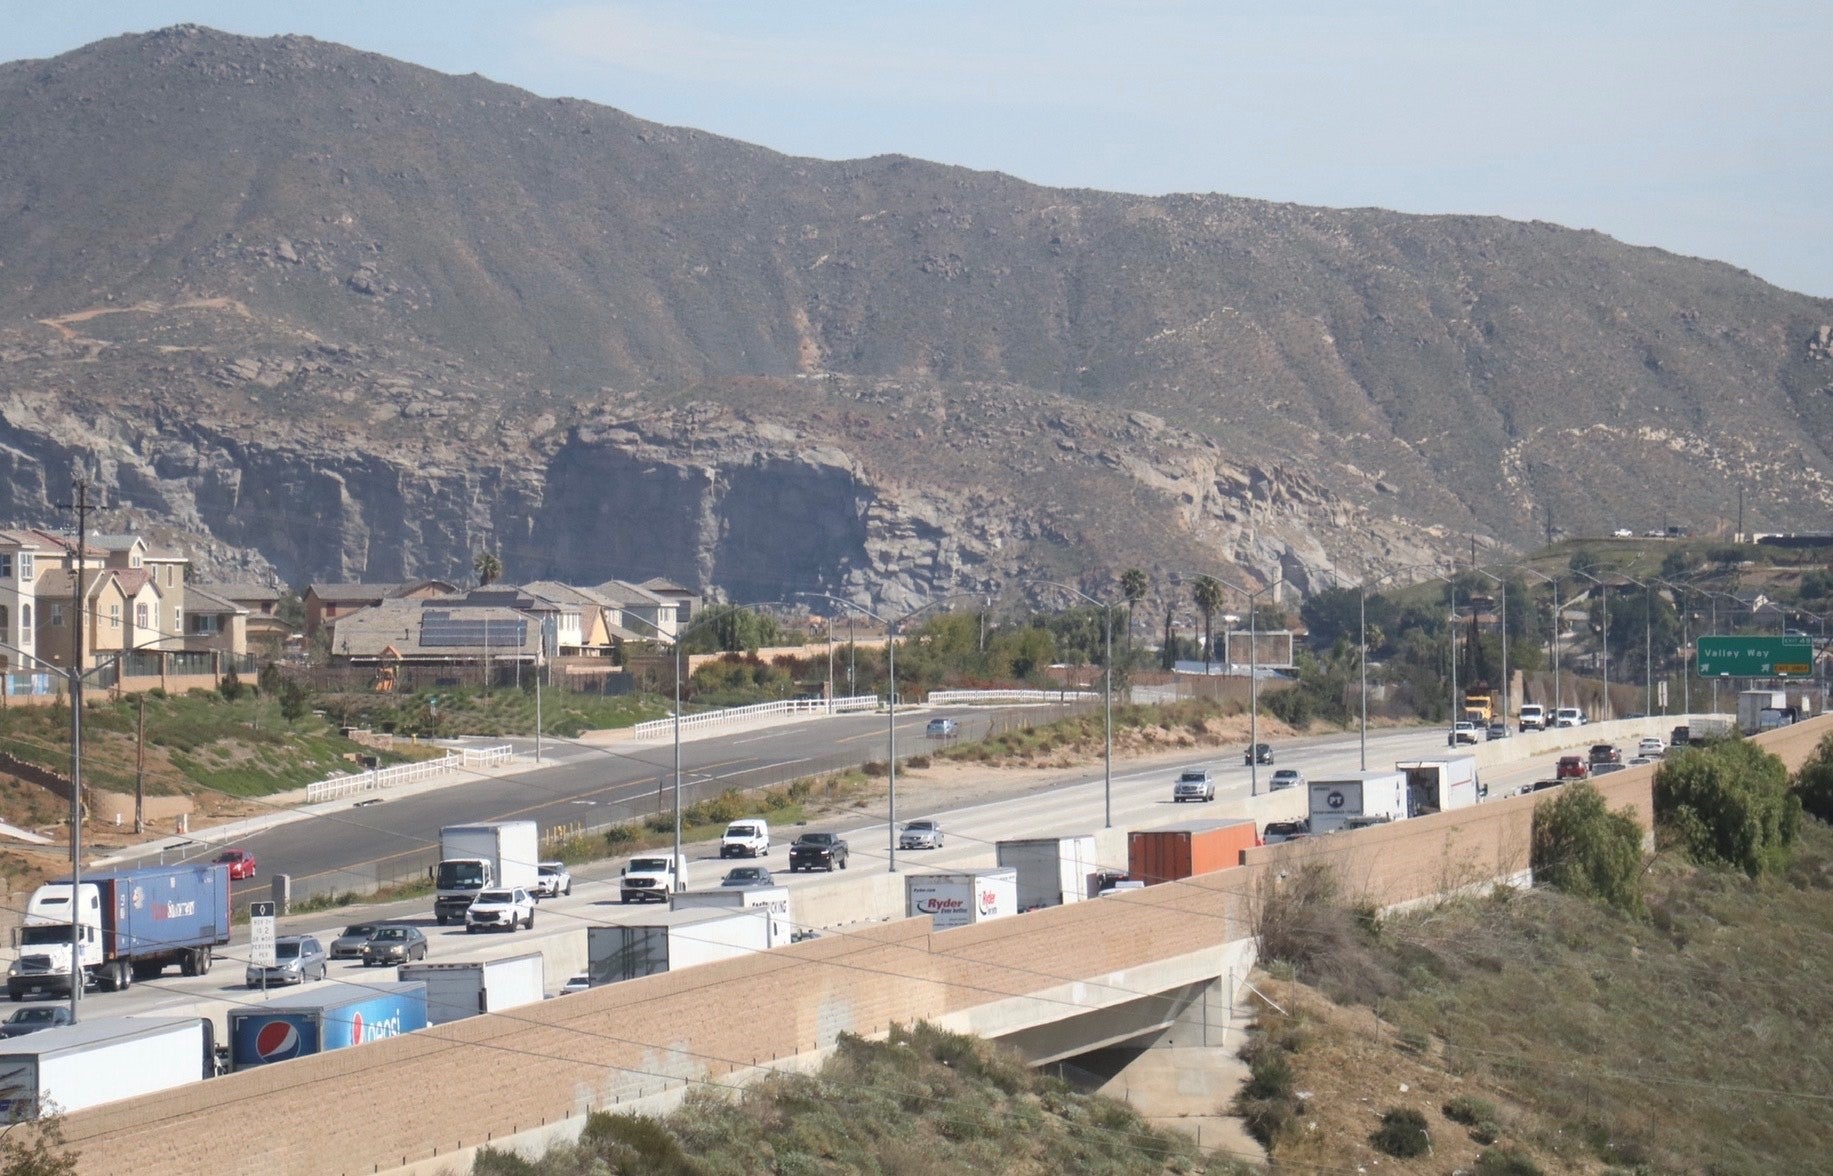 The 60 freeway runs through Jurupa Valley, California, near the offices of the Center for Community Action and Environmental Justice.